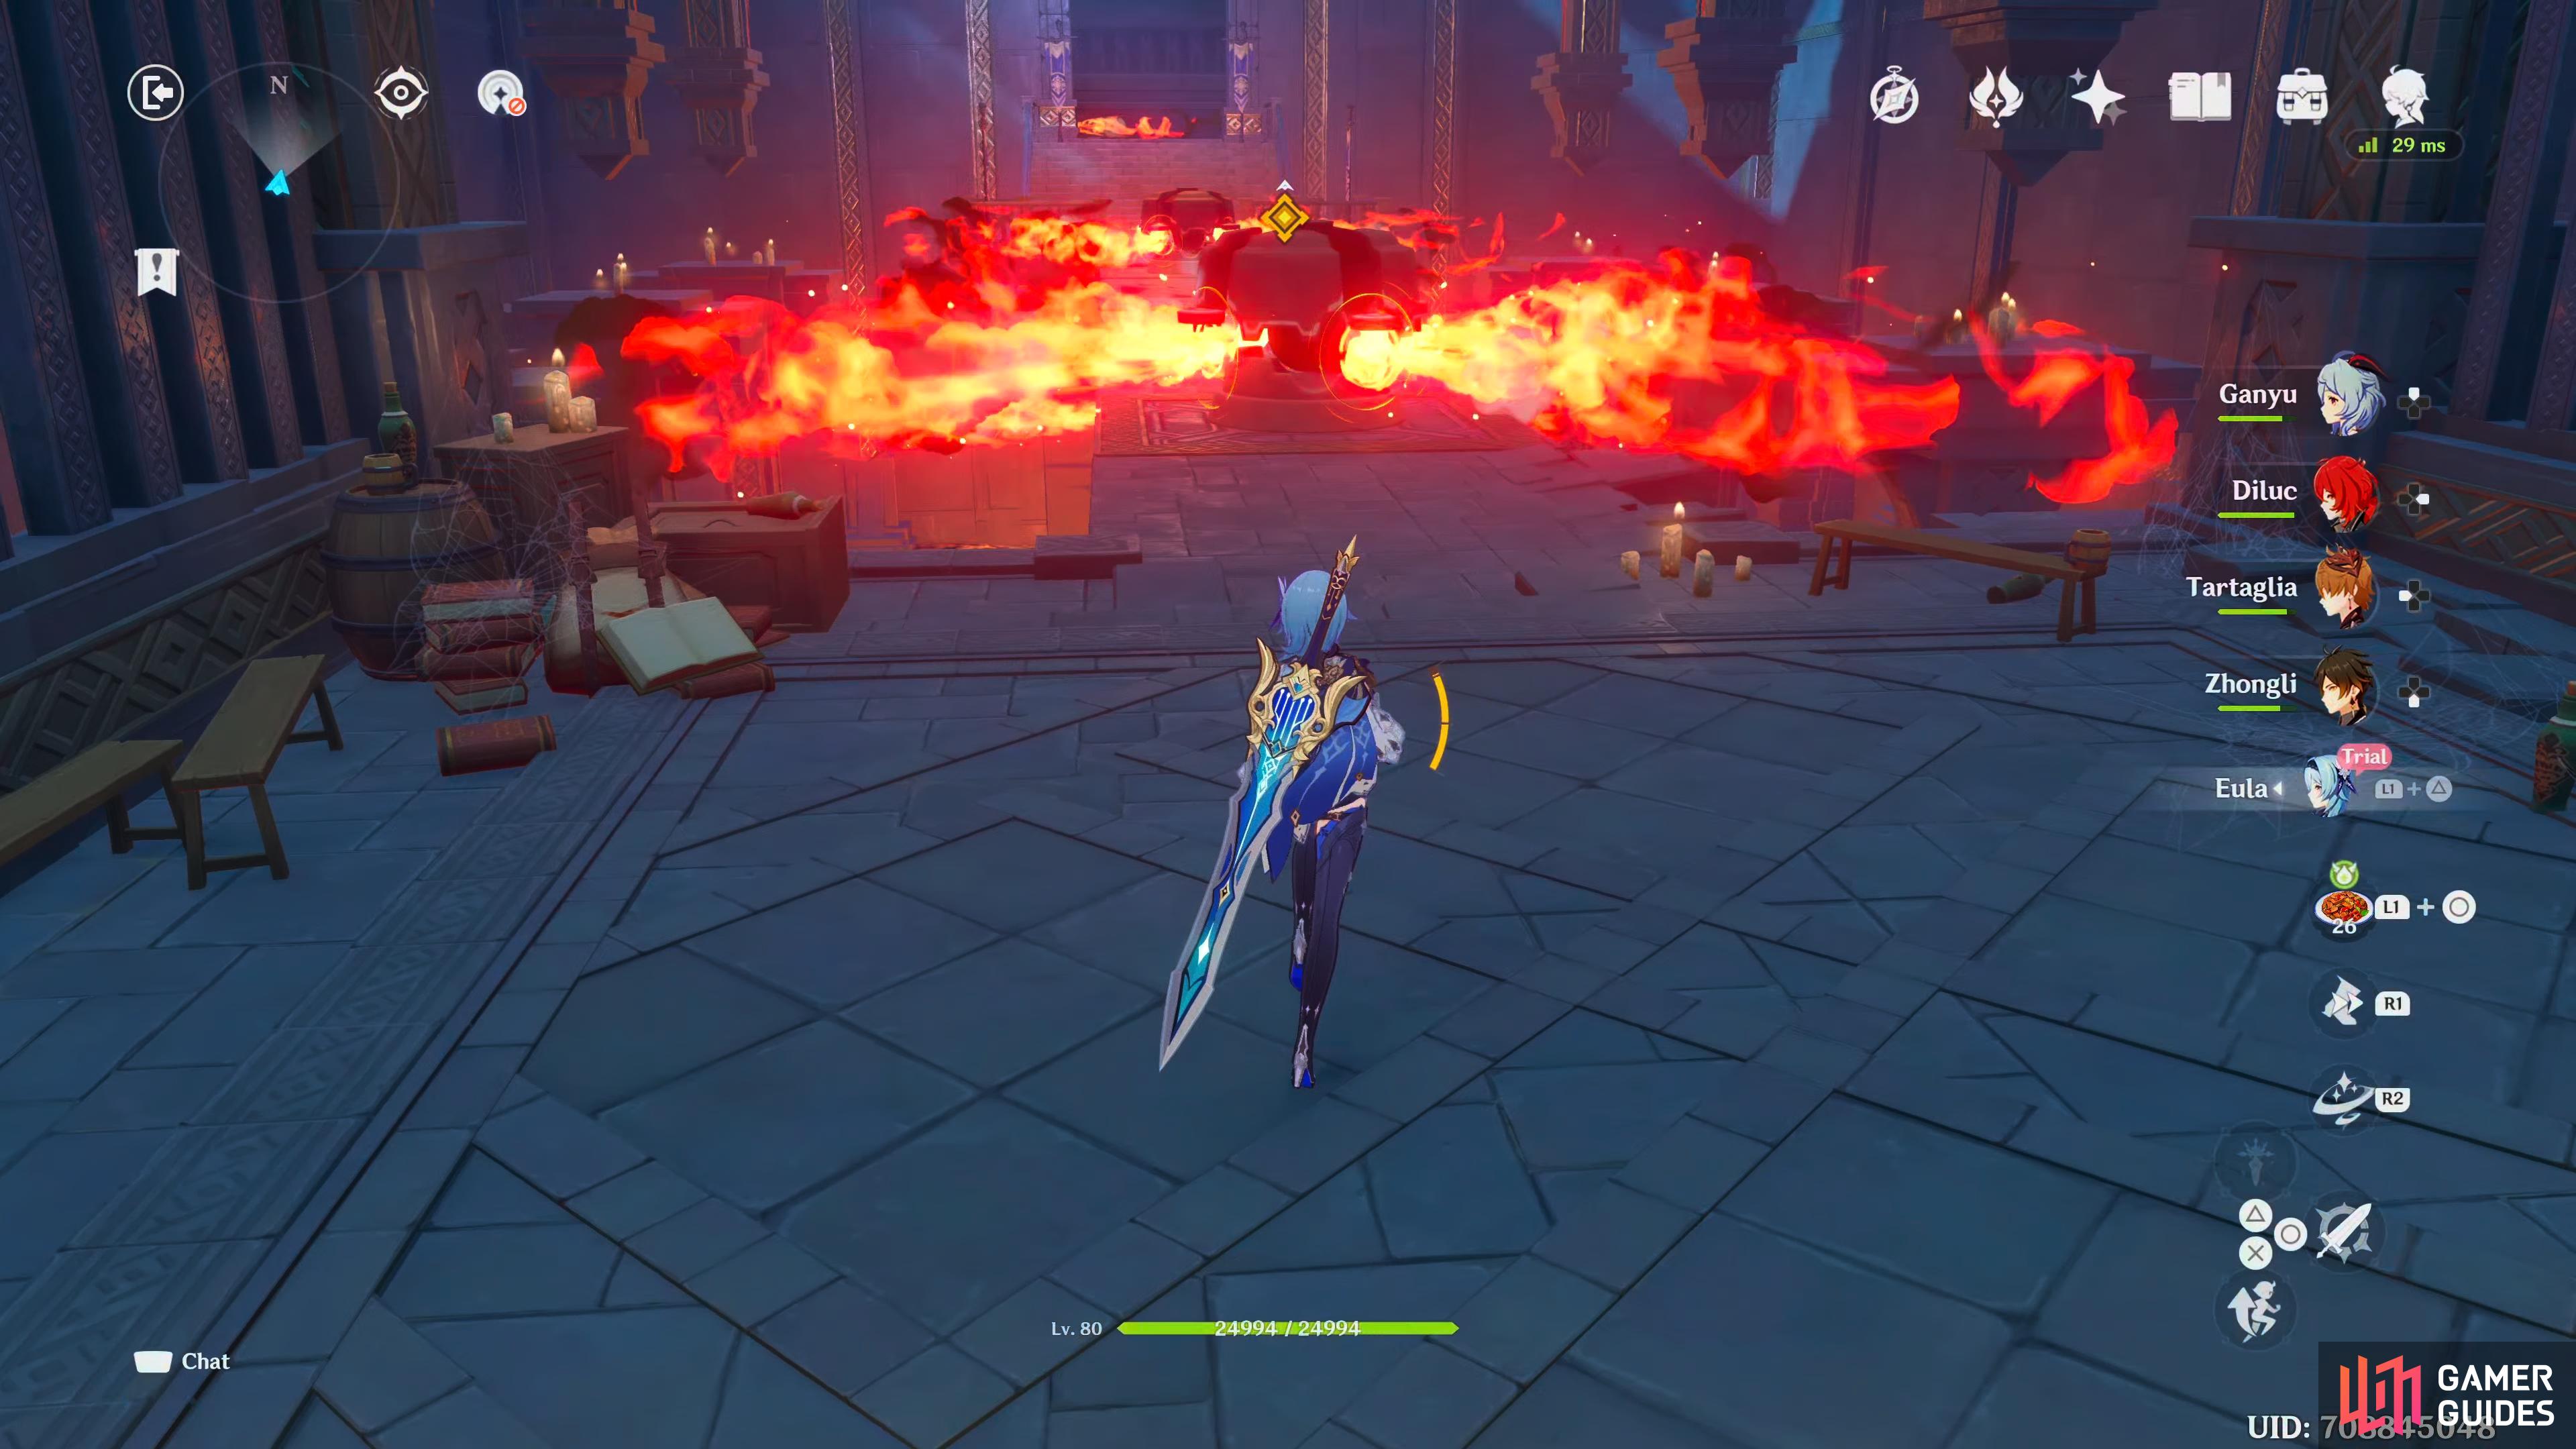 Attack the Flamethrower Turret with a Cryo user to stop it for a short while.